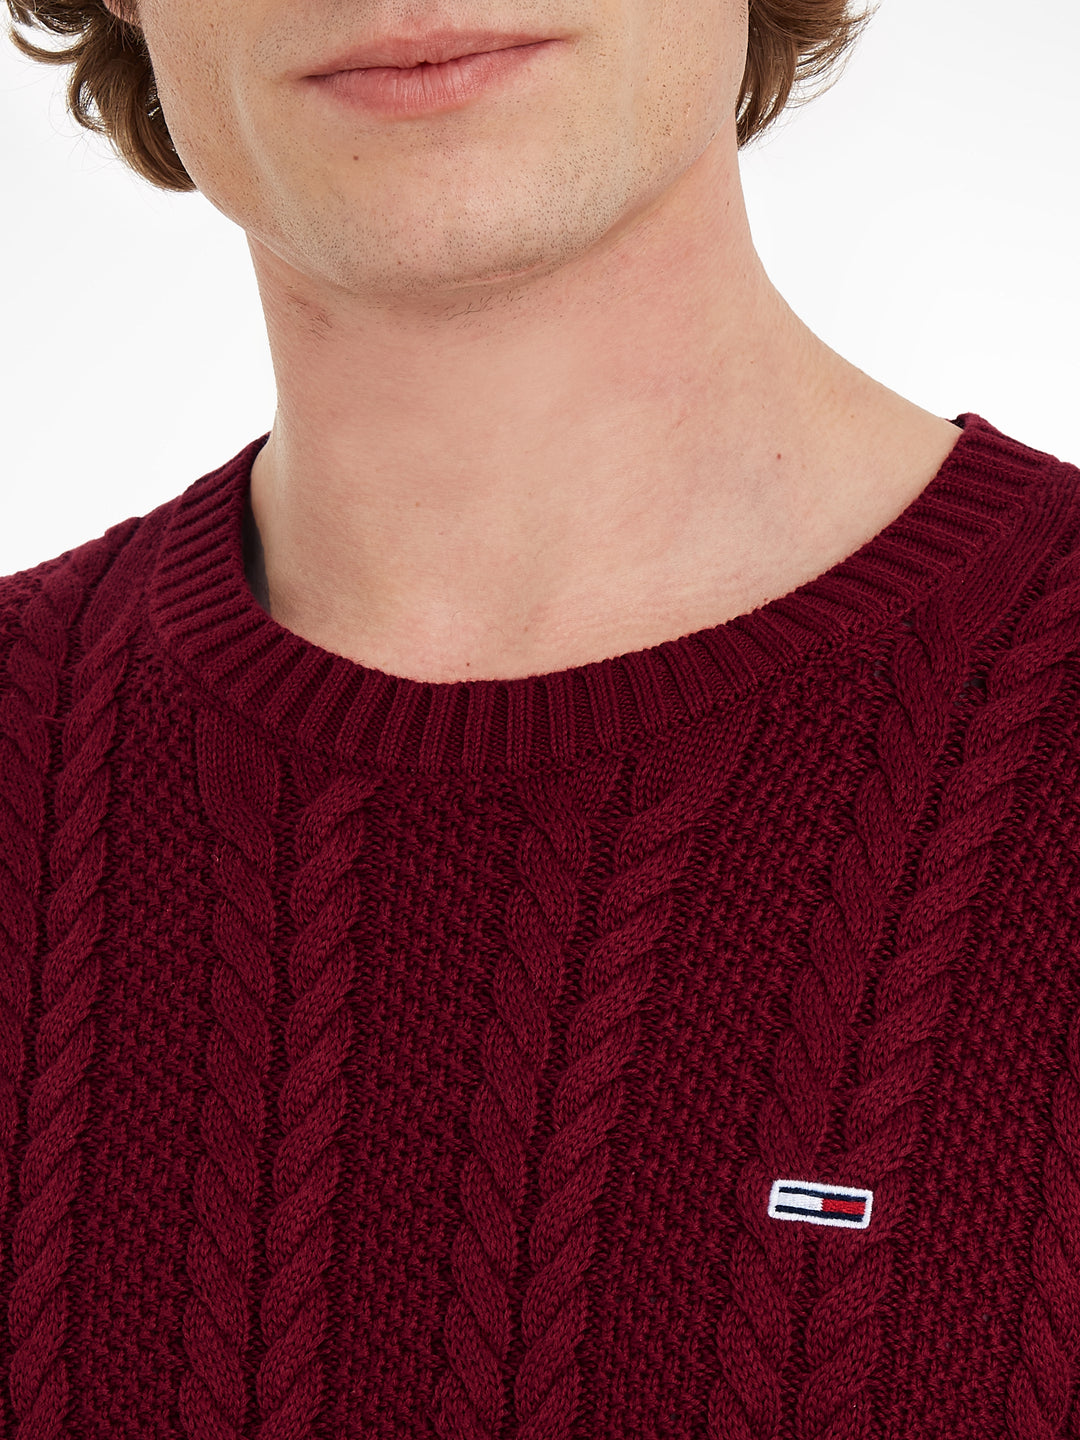 TJM REG CABLE SWEATER - ROUGE